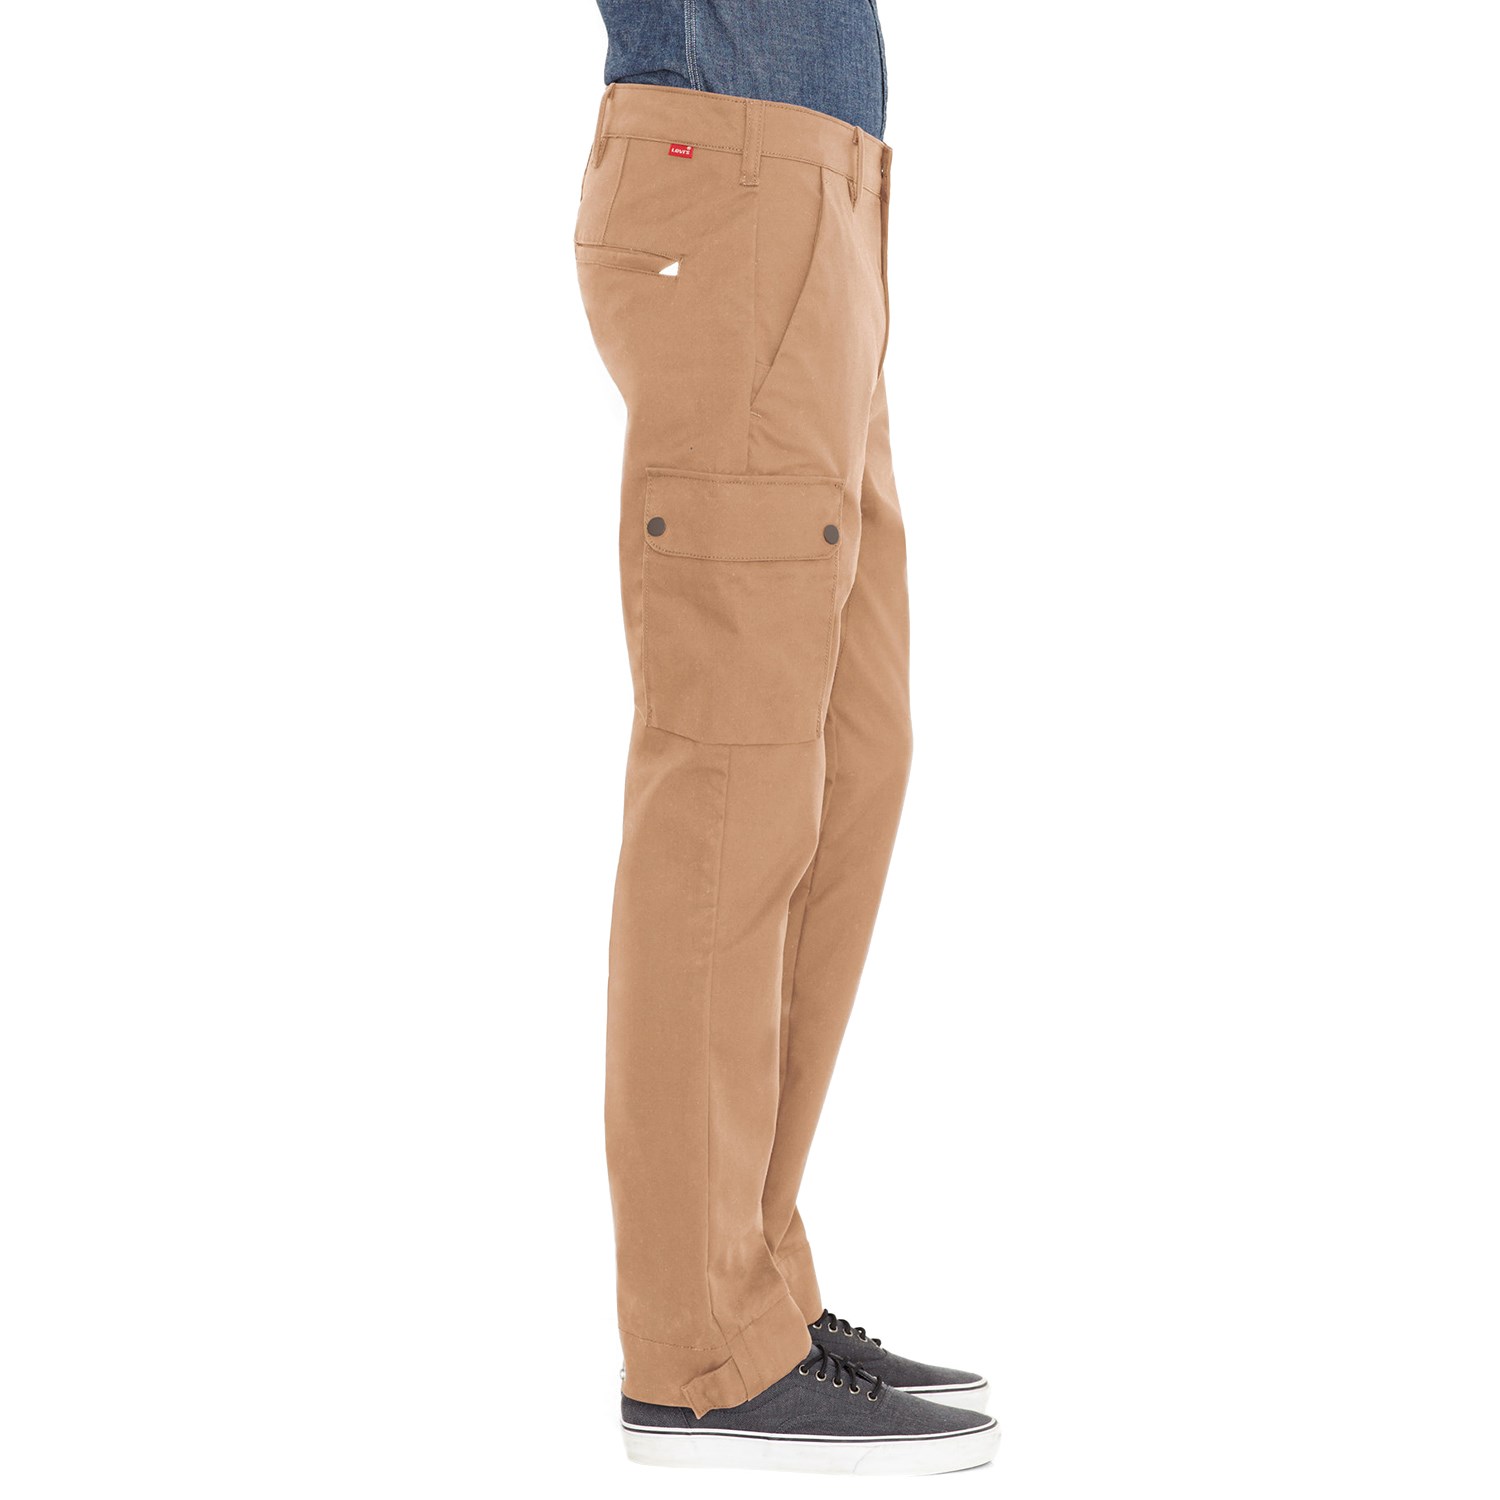 Levi's Commuter Cinched Cargo Pants | evo